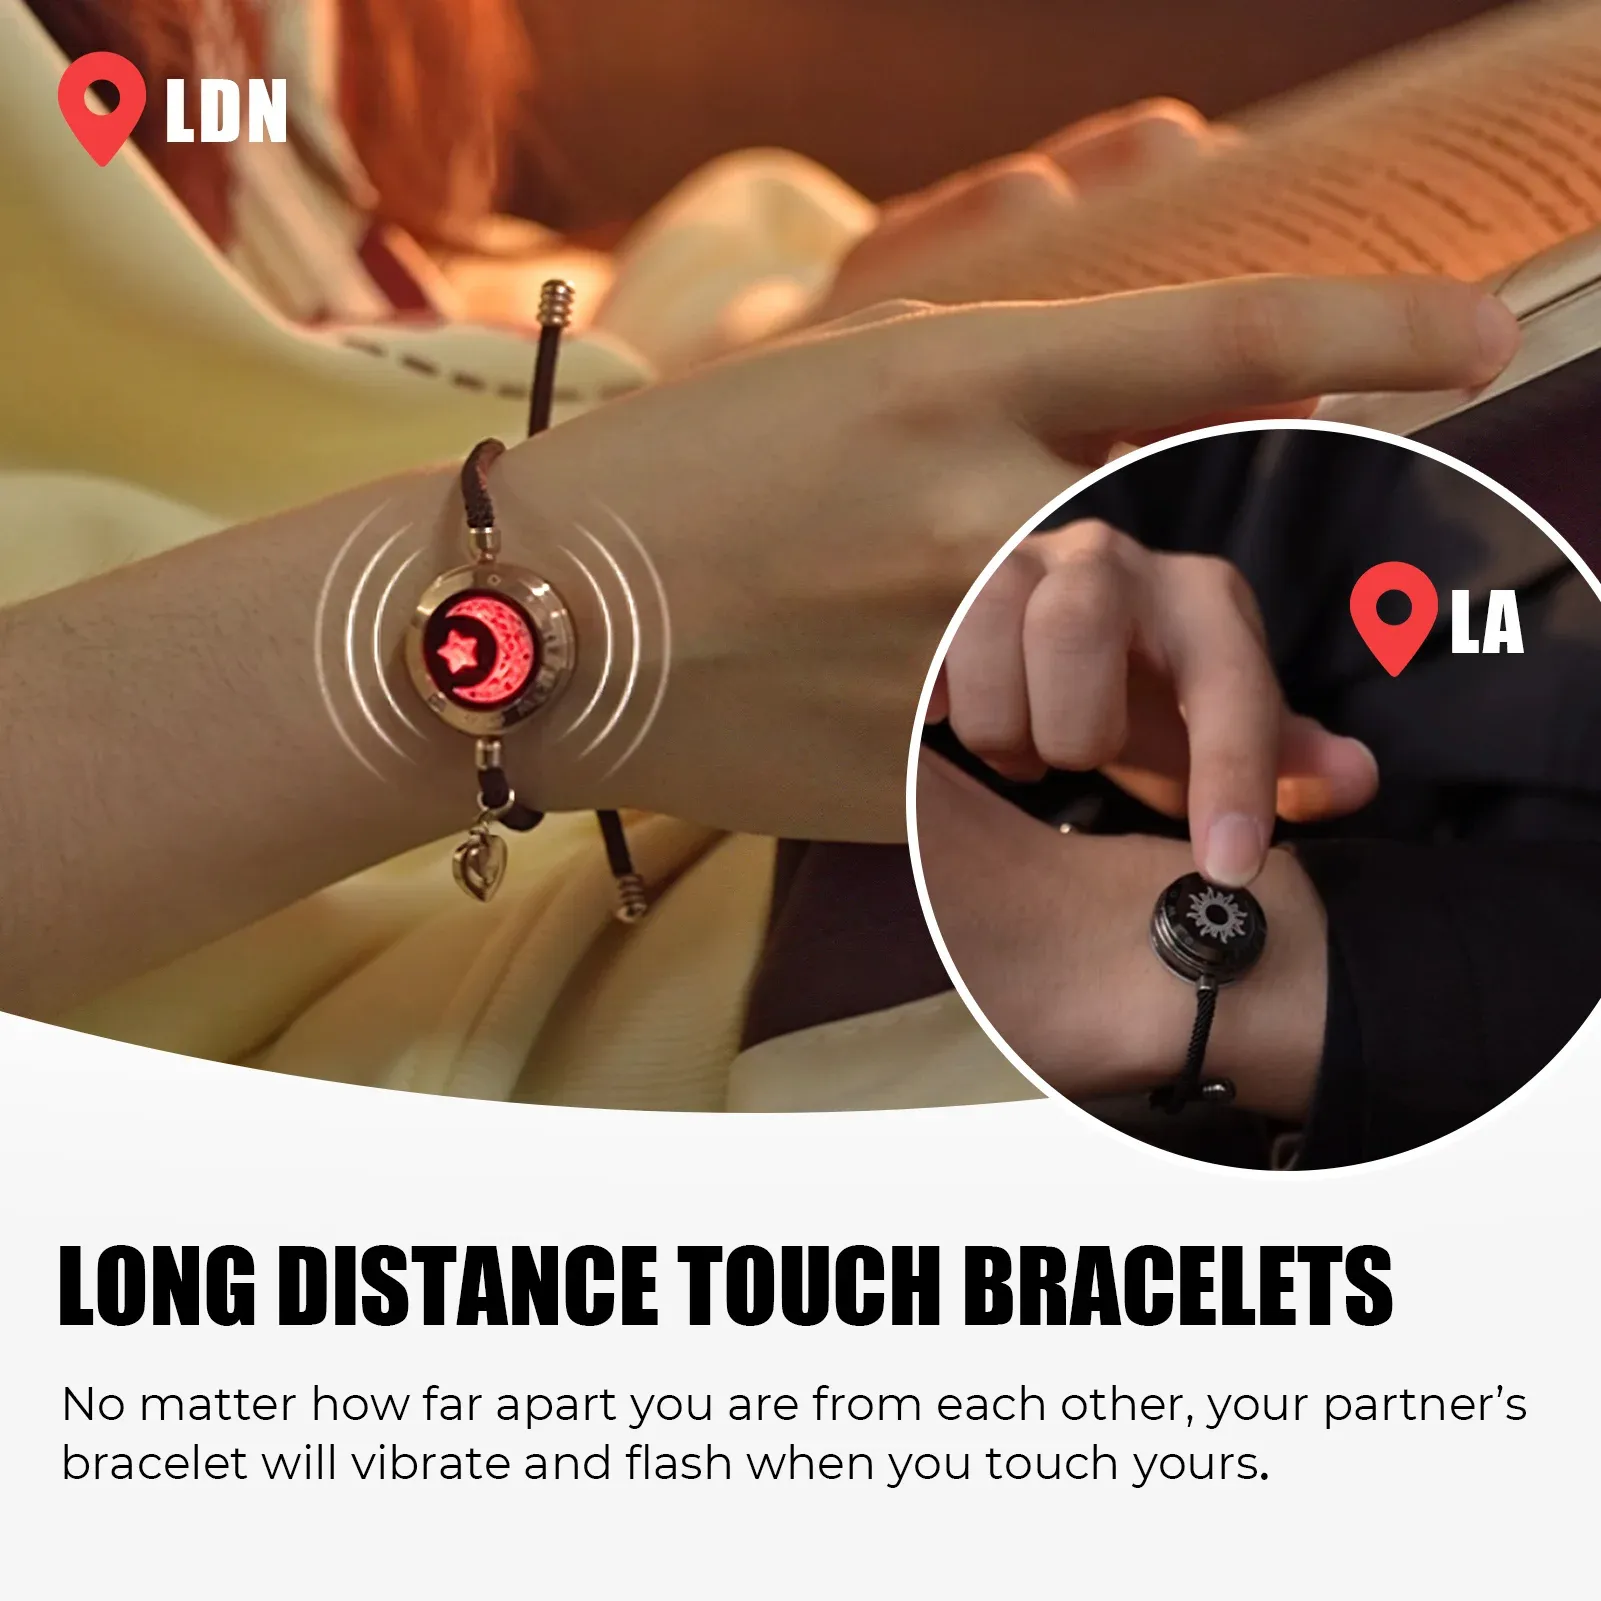 Smart Sun & Moon Love Projection Bracelet For Couples Totwoo Long Distance  Touch Light Up & Vibrate Gift From Luxury8ewelry, $93.58